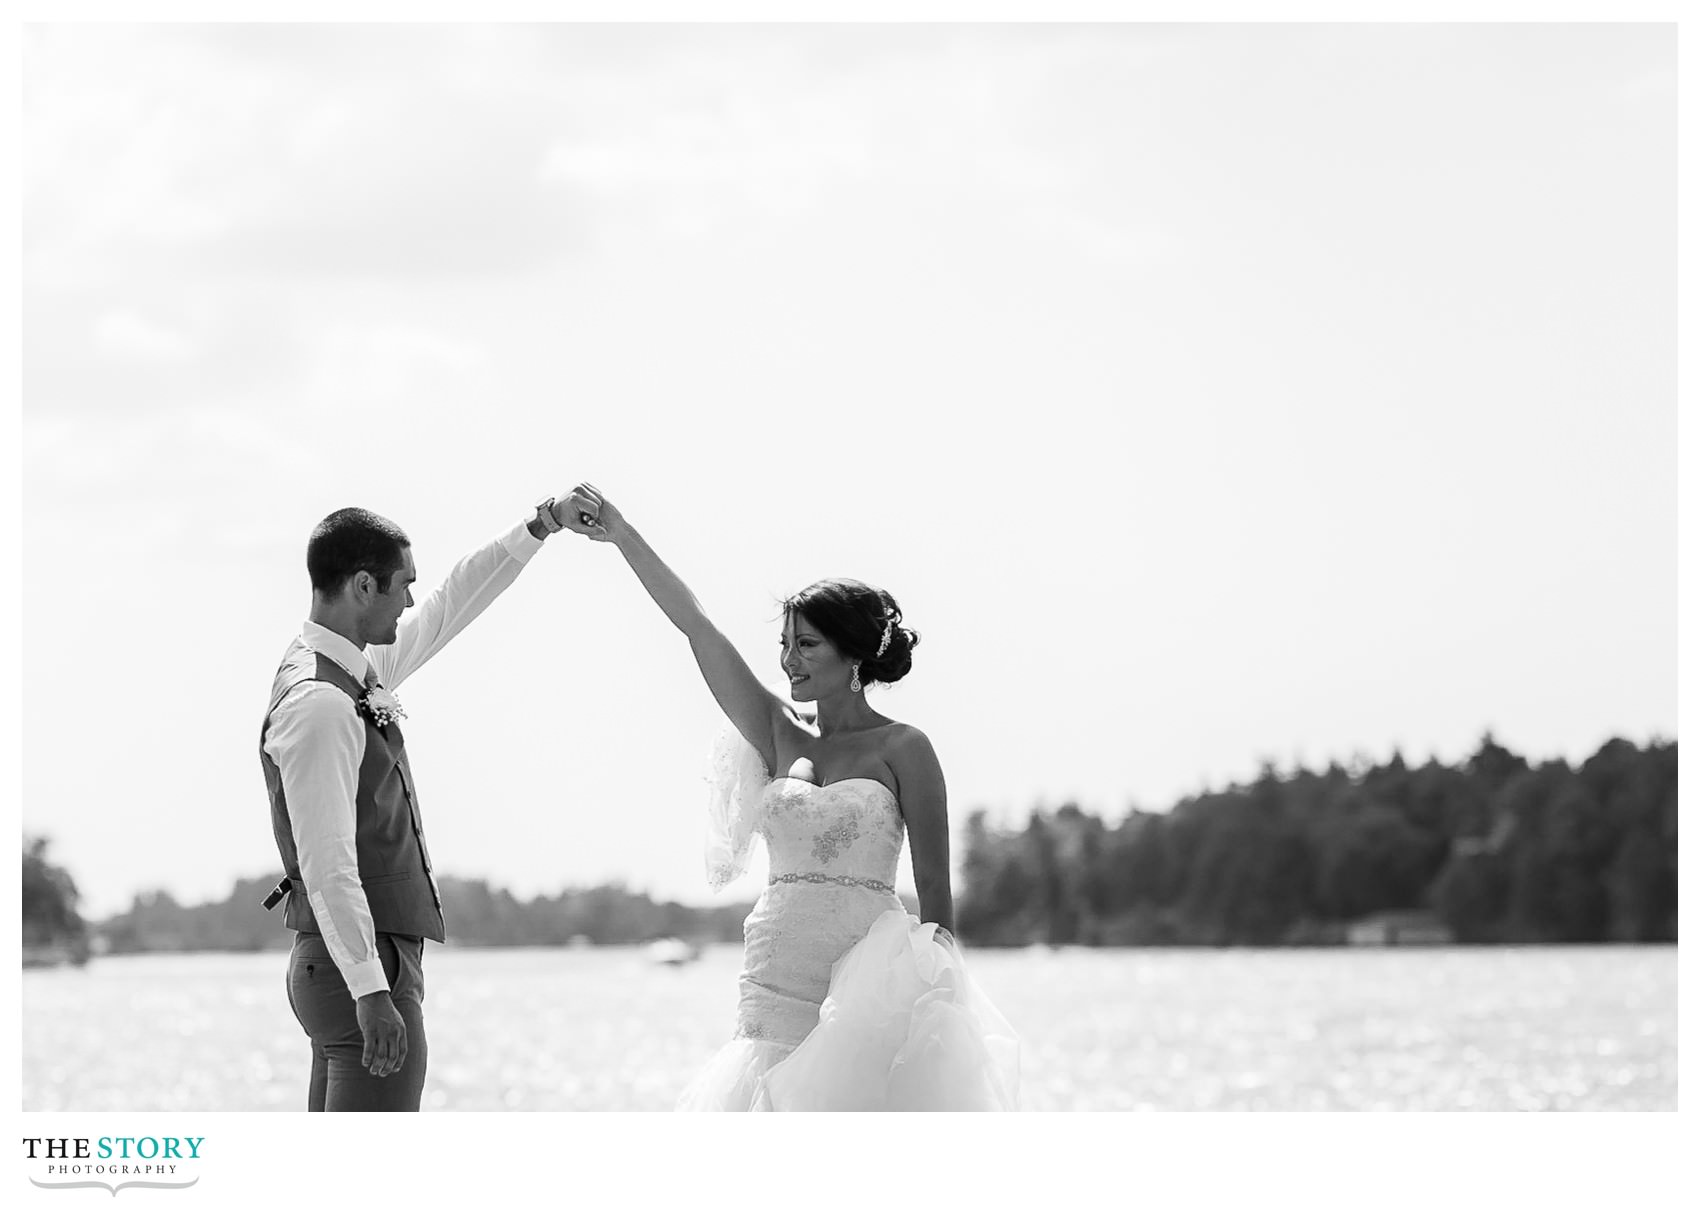 thousand islands wedding photography at St. Lawrence river wedding